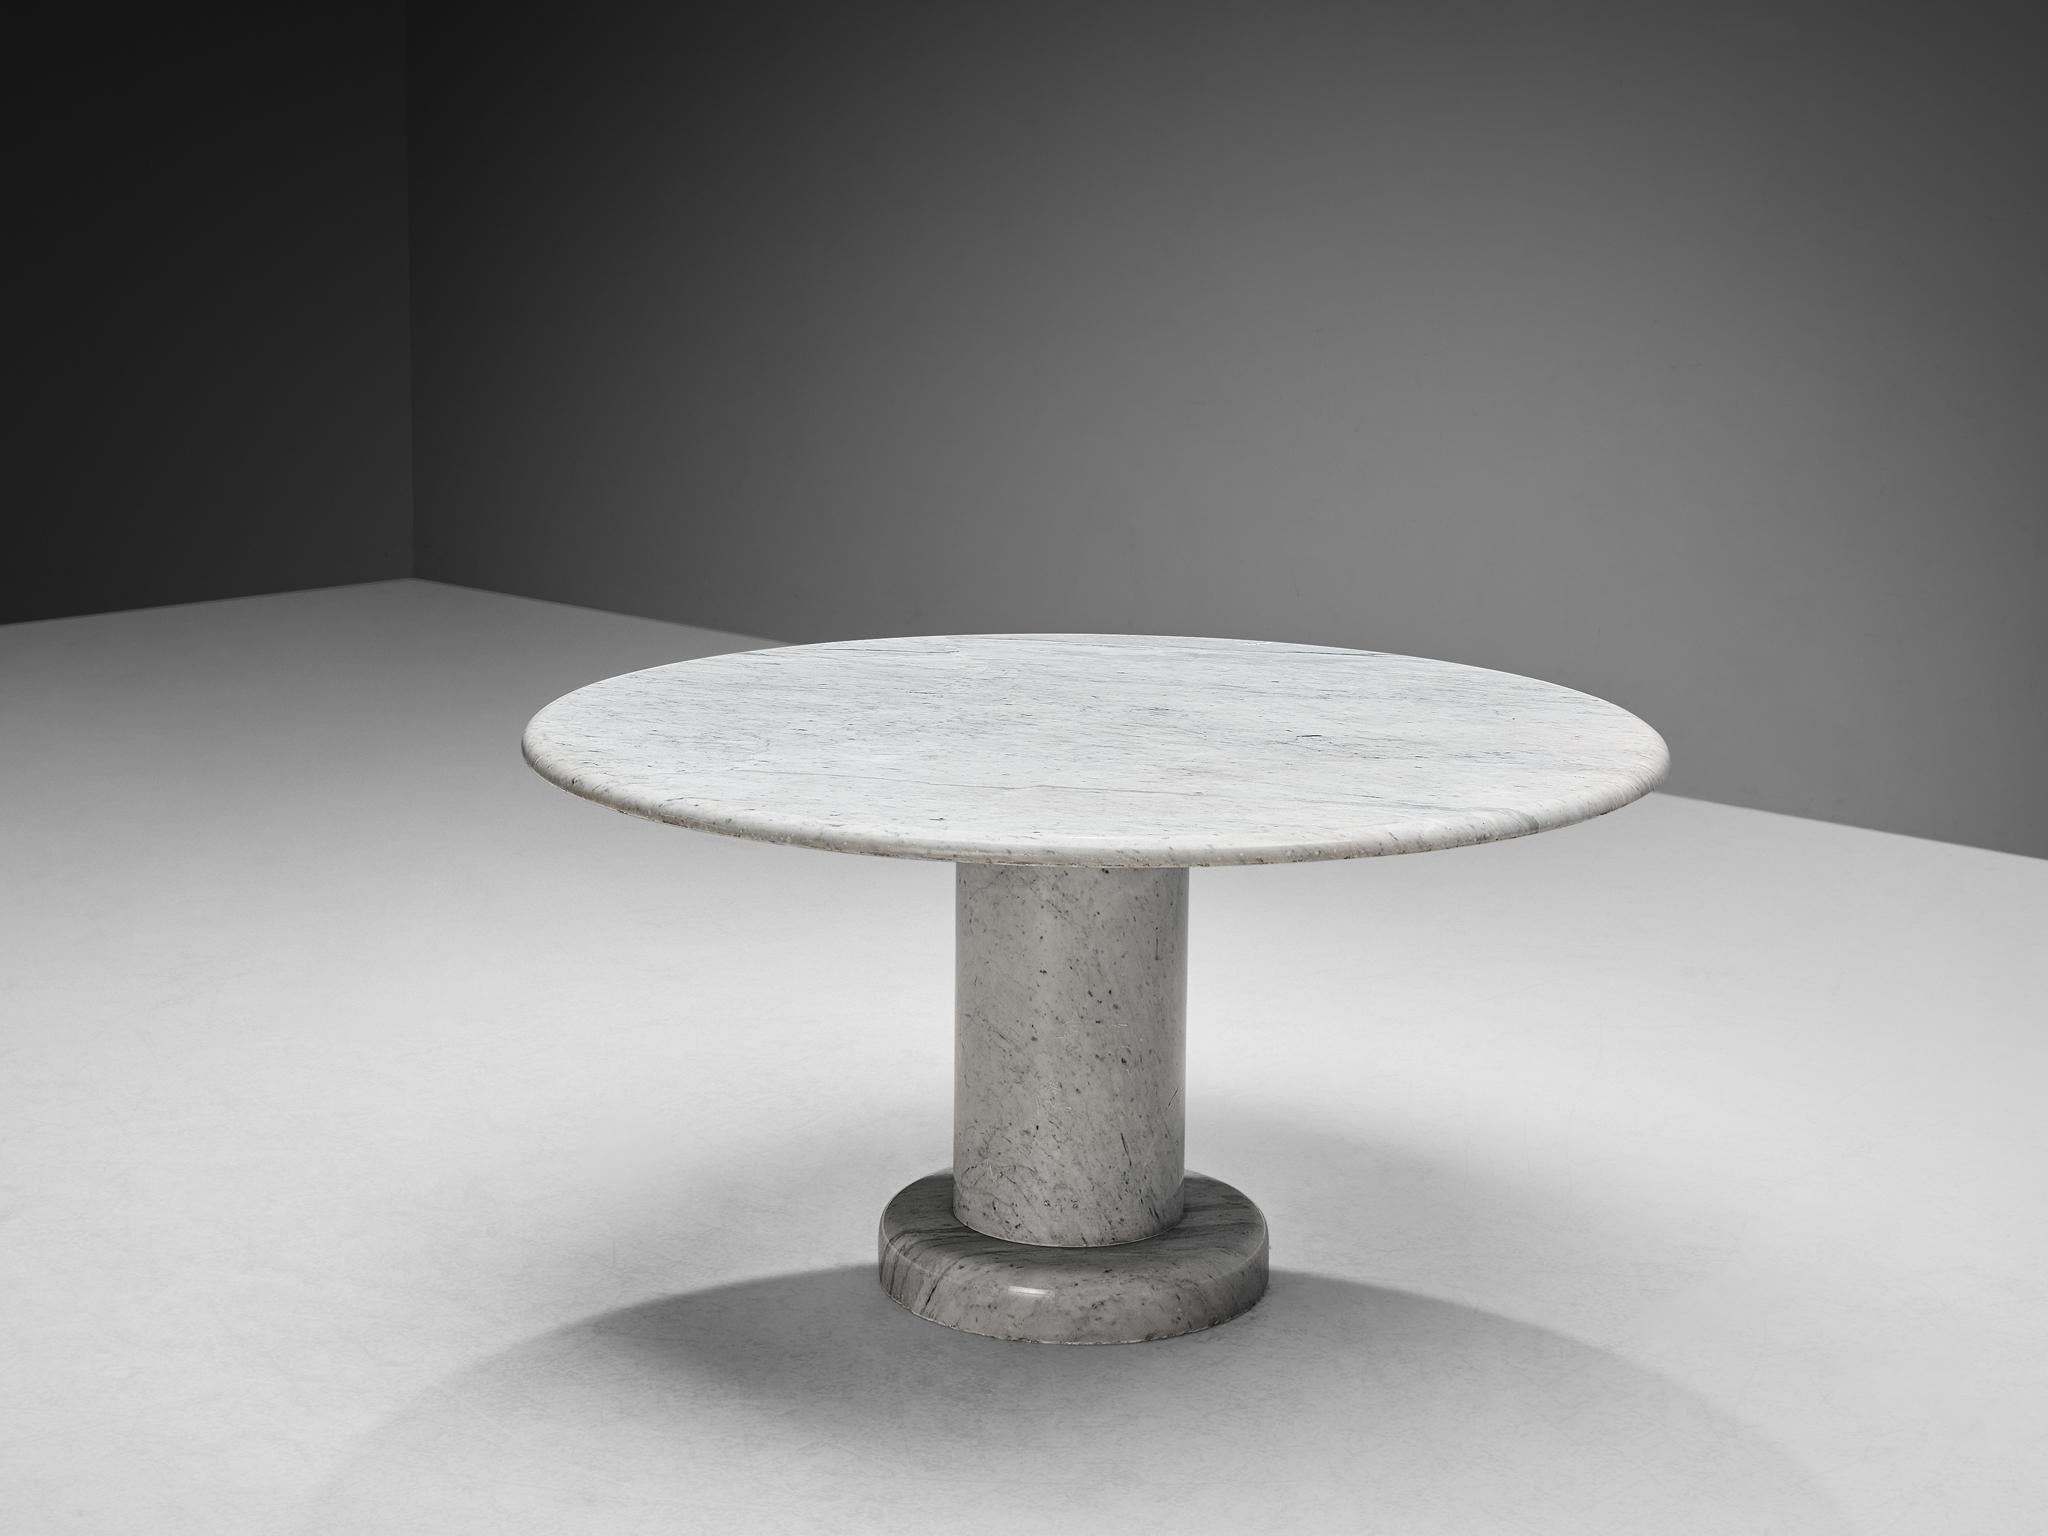 Round dining table, white marble, Italy, 1970s

This table is a skilful example of postmodern design and a great classic for versatile use. One solid marble pedestal, which is supported by a marble base, holds a minimalistic table top. The